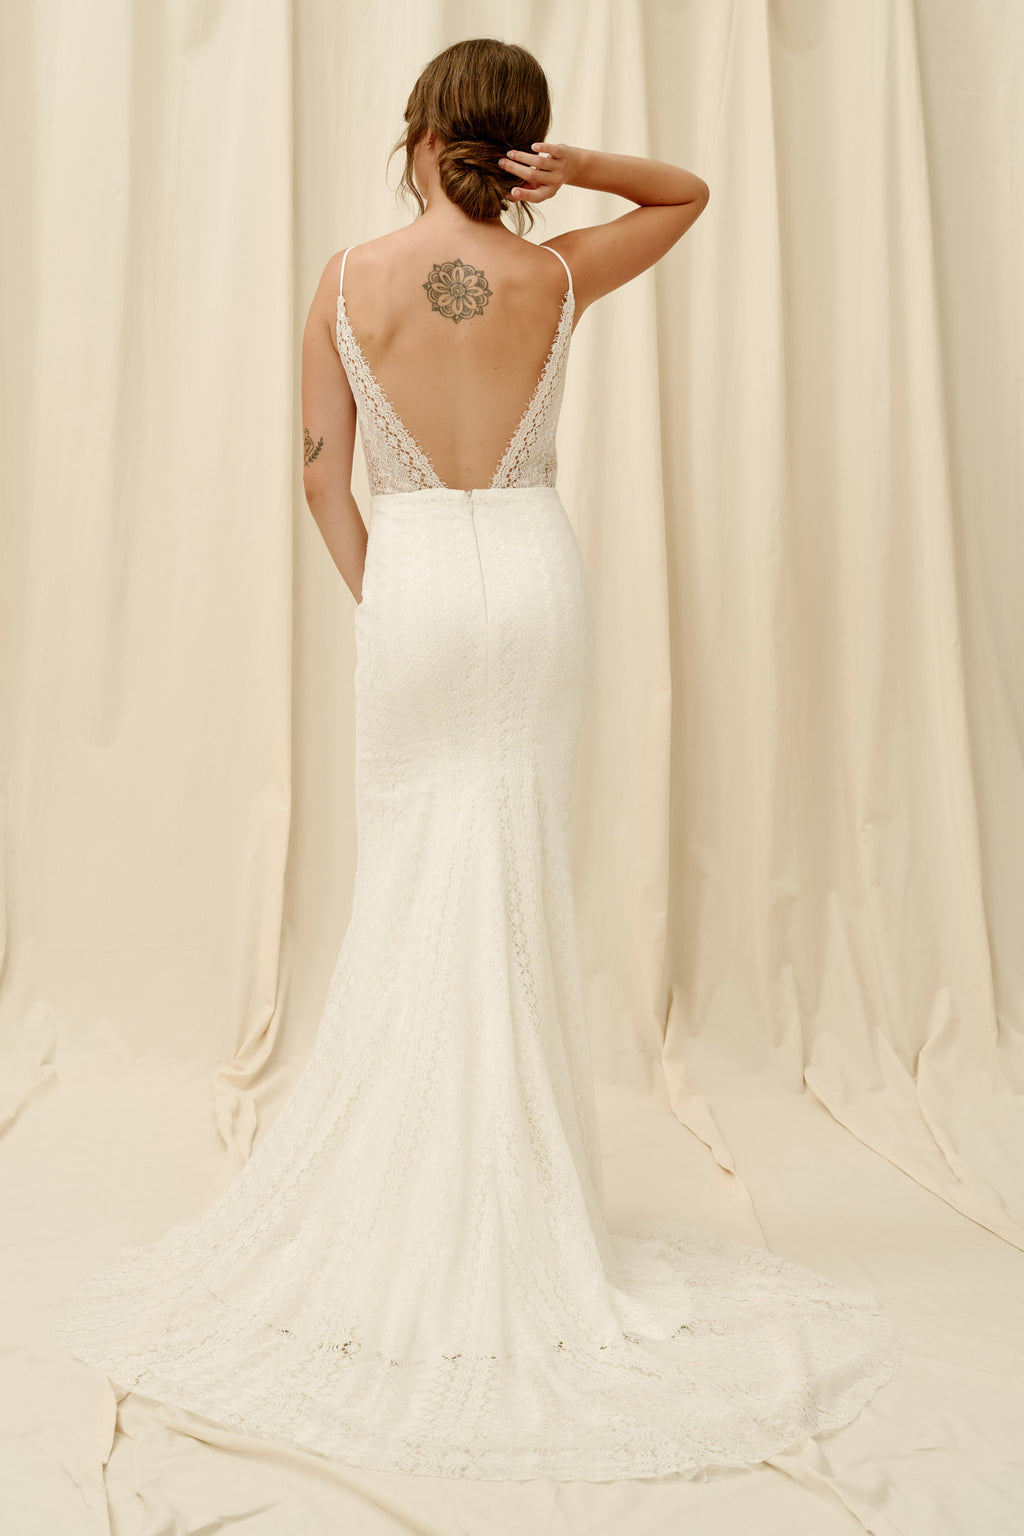 Fitted lace wedding dress with spaghetti straps and a long train